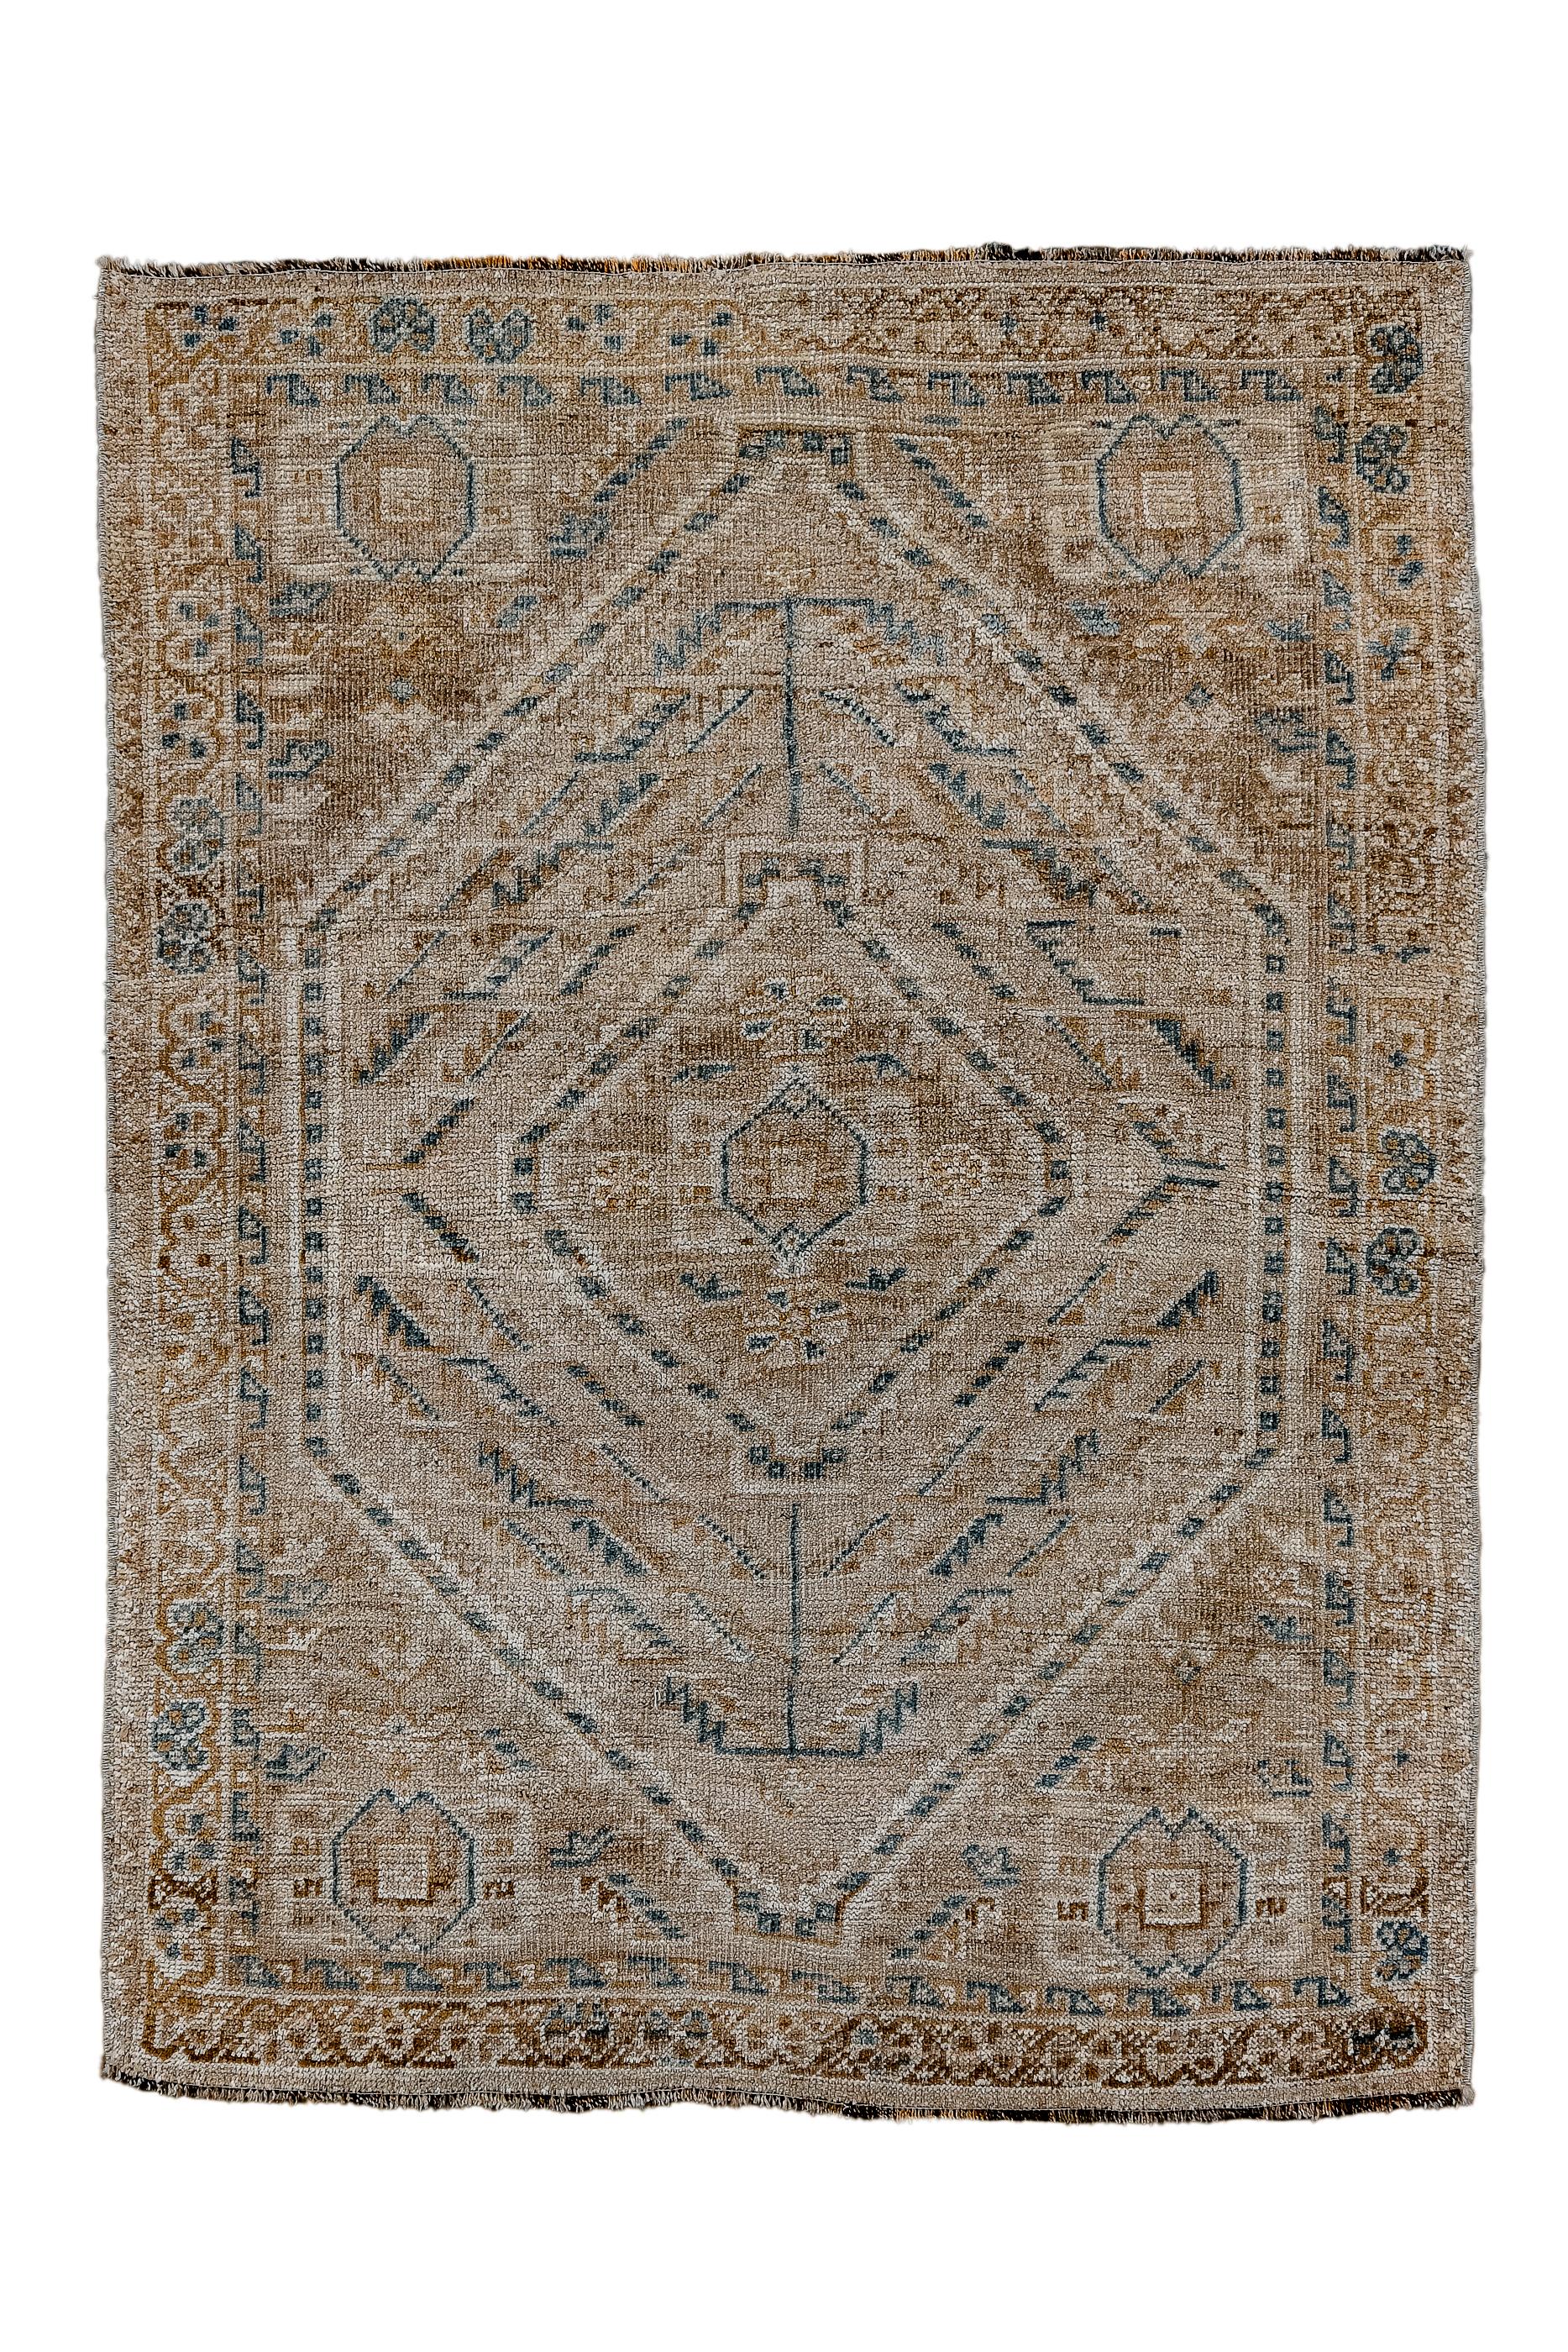 The rust corners with simplified south Persian tribal medallions set off the brown hexagonal field with a central device repeating those of the corners, and a triple wreath of serrated, oblique leaves.  The dark sections of the leaves create a sense